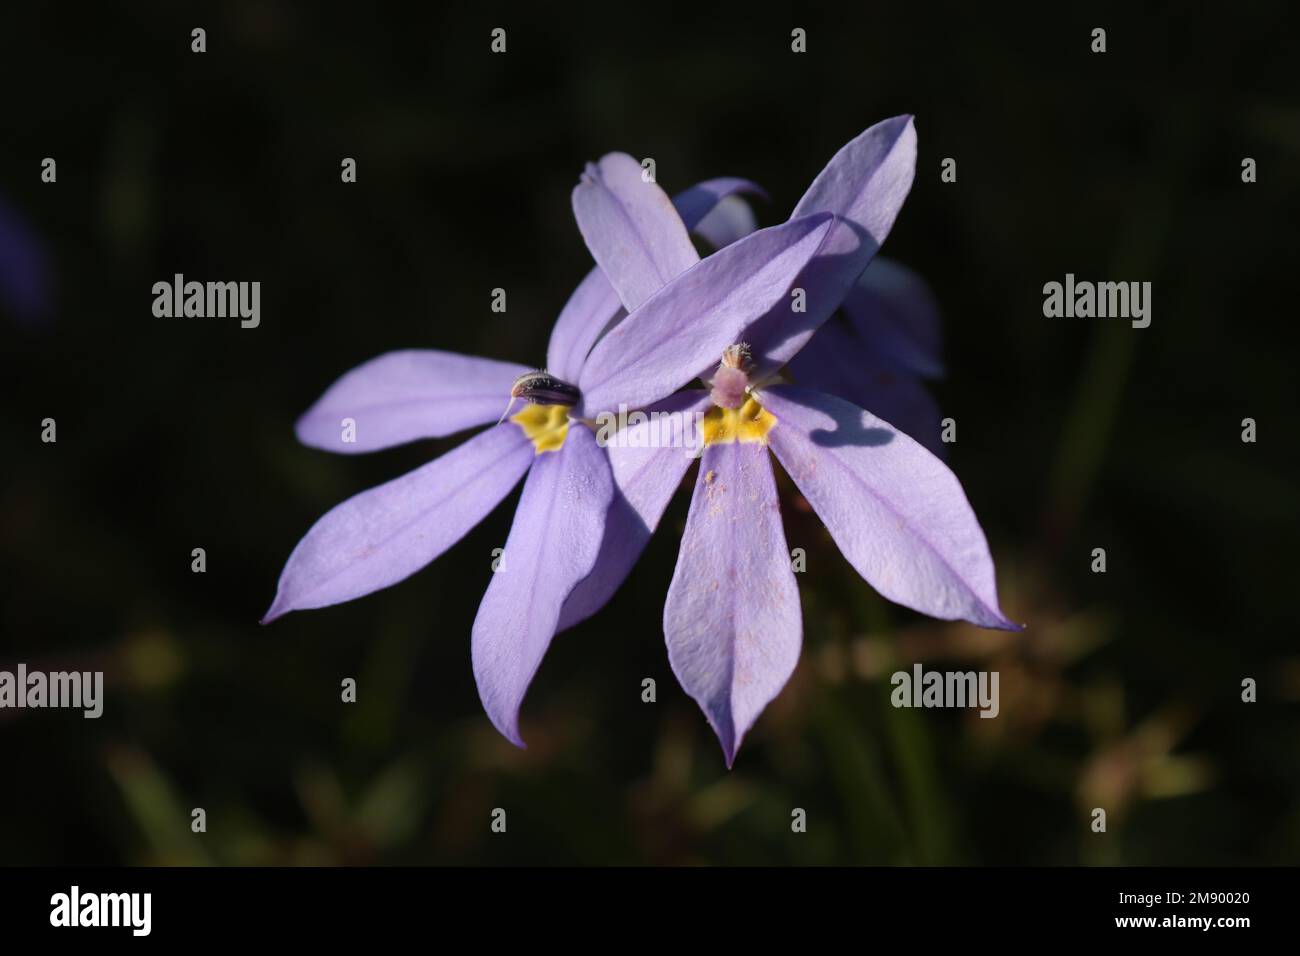 Extreme close-up image of the beautiful mauve blue flowers of Isotoma axillaris 'Astro Blue'. Also known as Blue Star, Rock isotoma or Laurentia. Agai Stock Photo